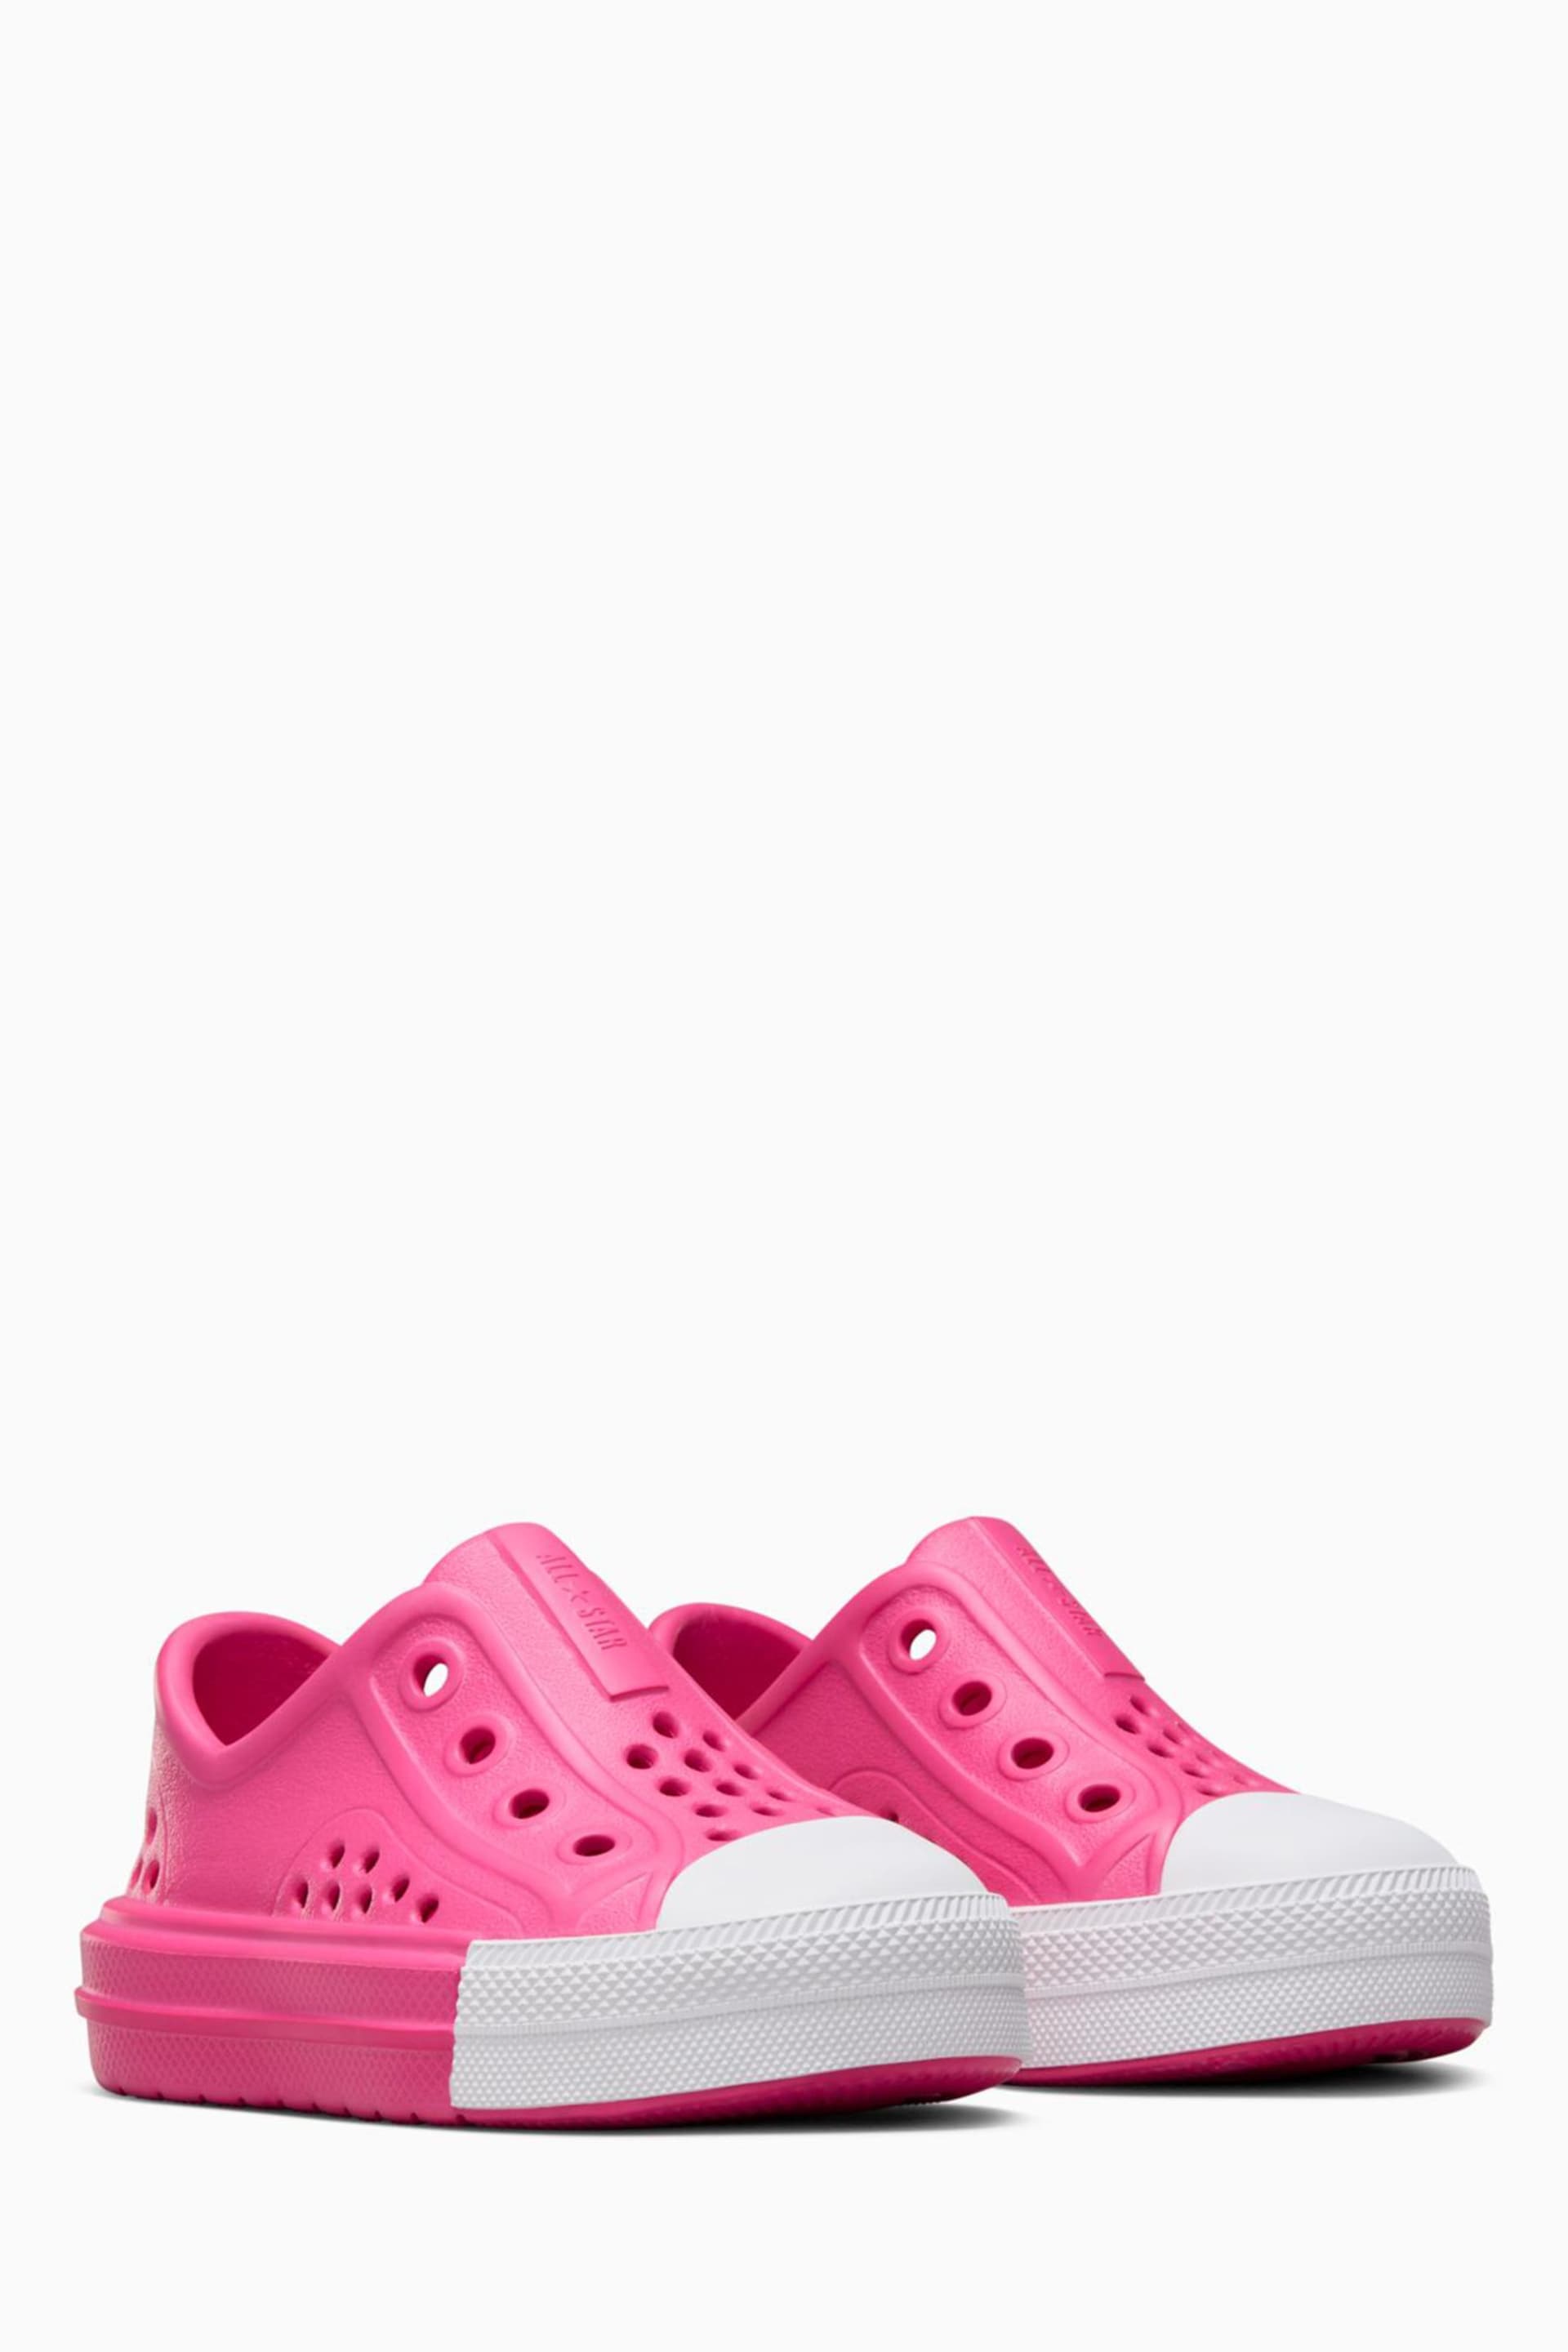 Converse Pink Play Lite Toddler Sandals - Image 3 of 8